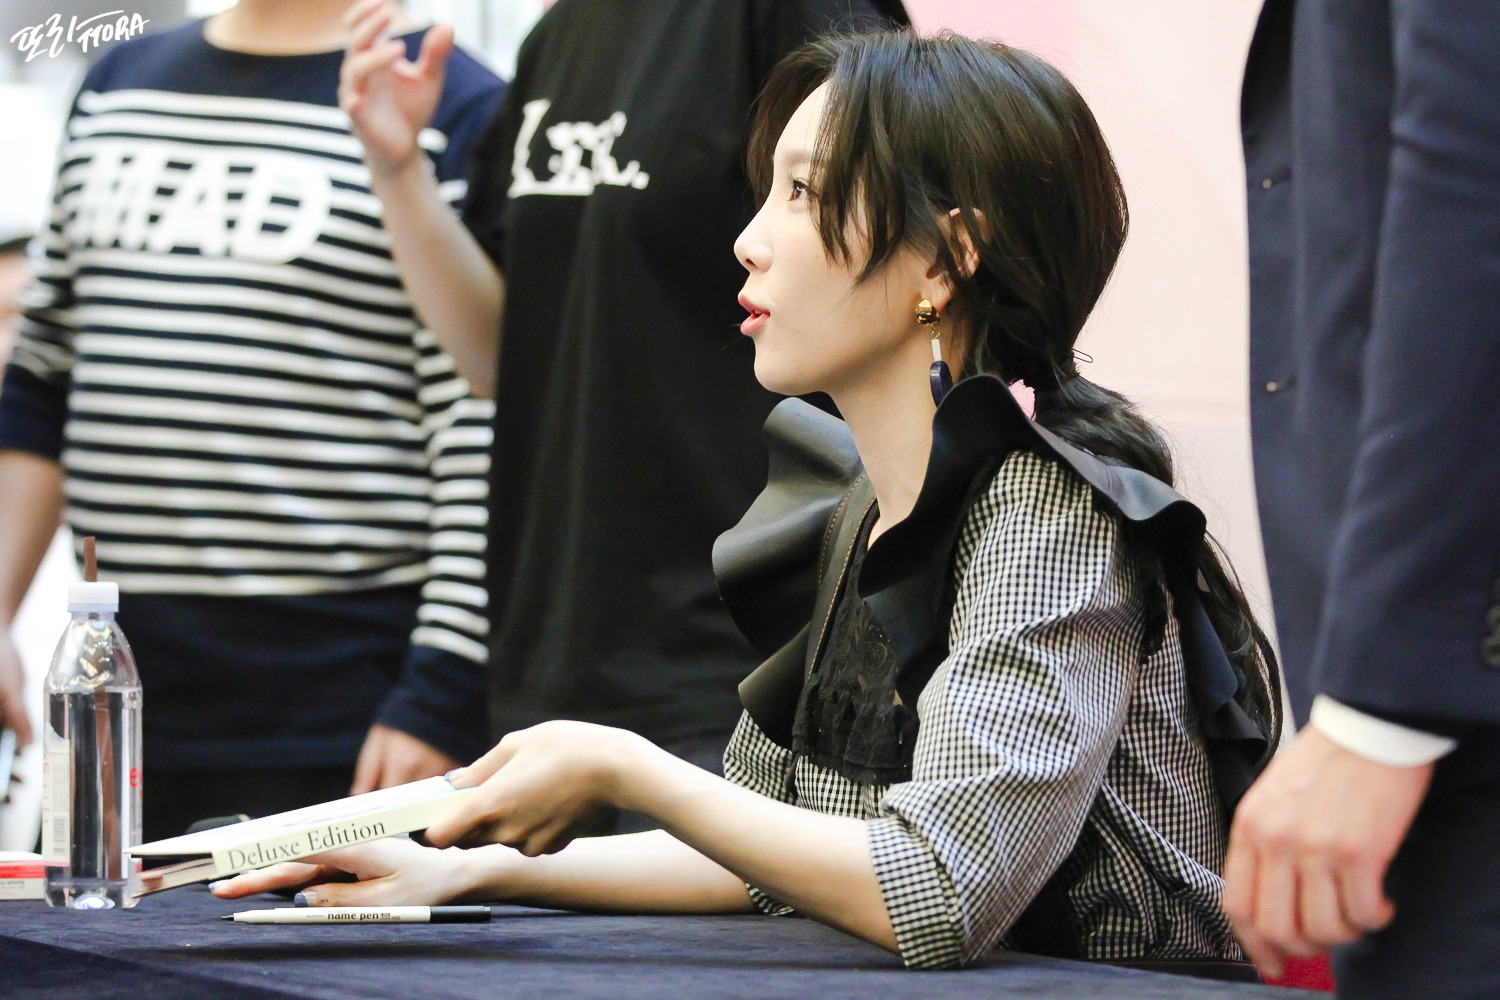 [PIC][16-04-2017]TaeYeon tham dự buổi Fansign cho “MY VOICE DELUXE EDITION” tại AK PLAZA vào chiều nay  - Page 5 2166173859036868286644